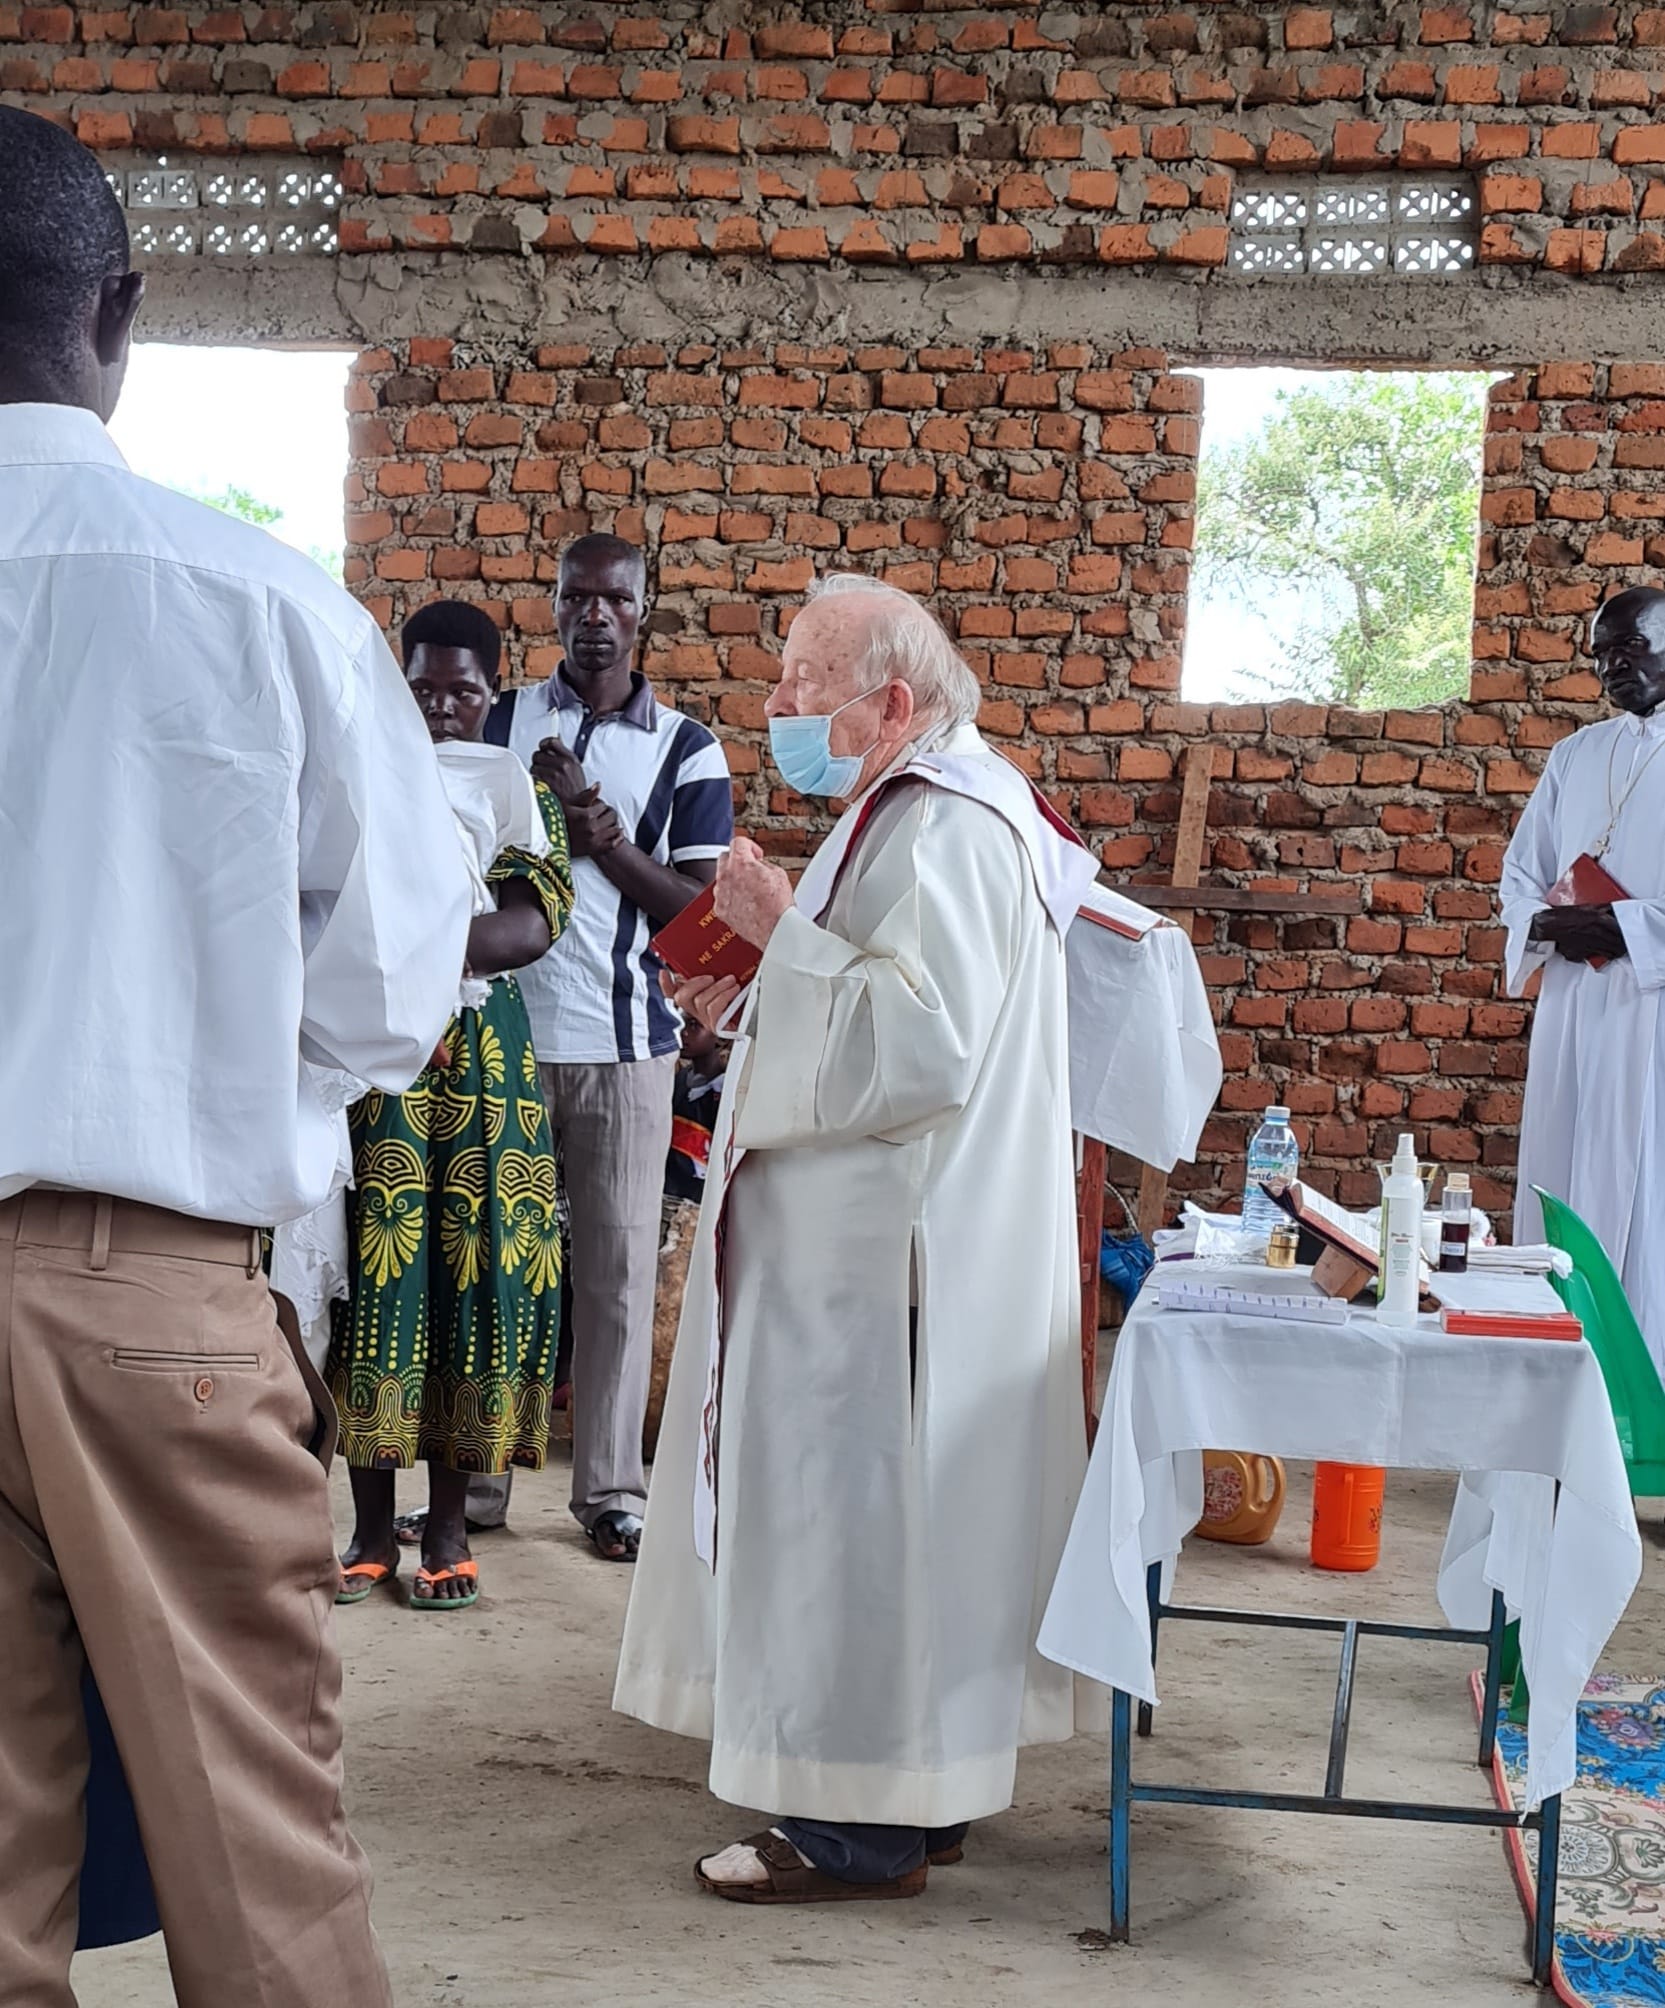 Father Alberto Anichini celebrates Mass at one of the outposts in his parish. The church is open air, with brick walls. 